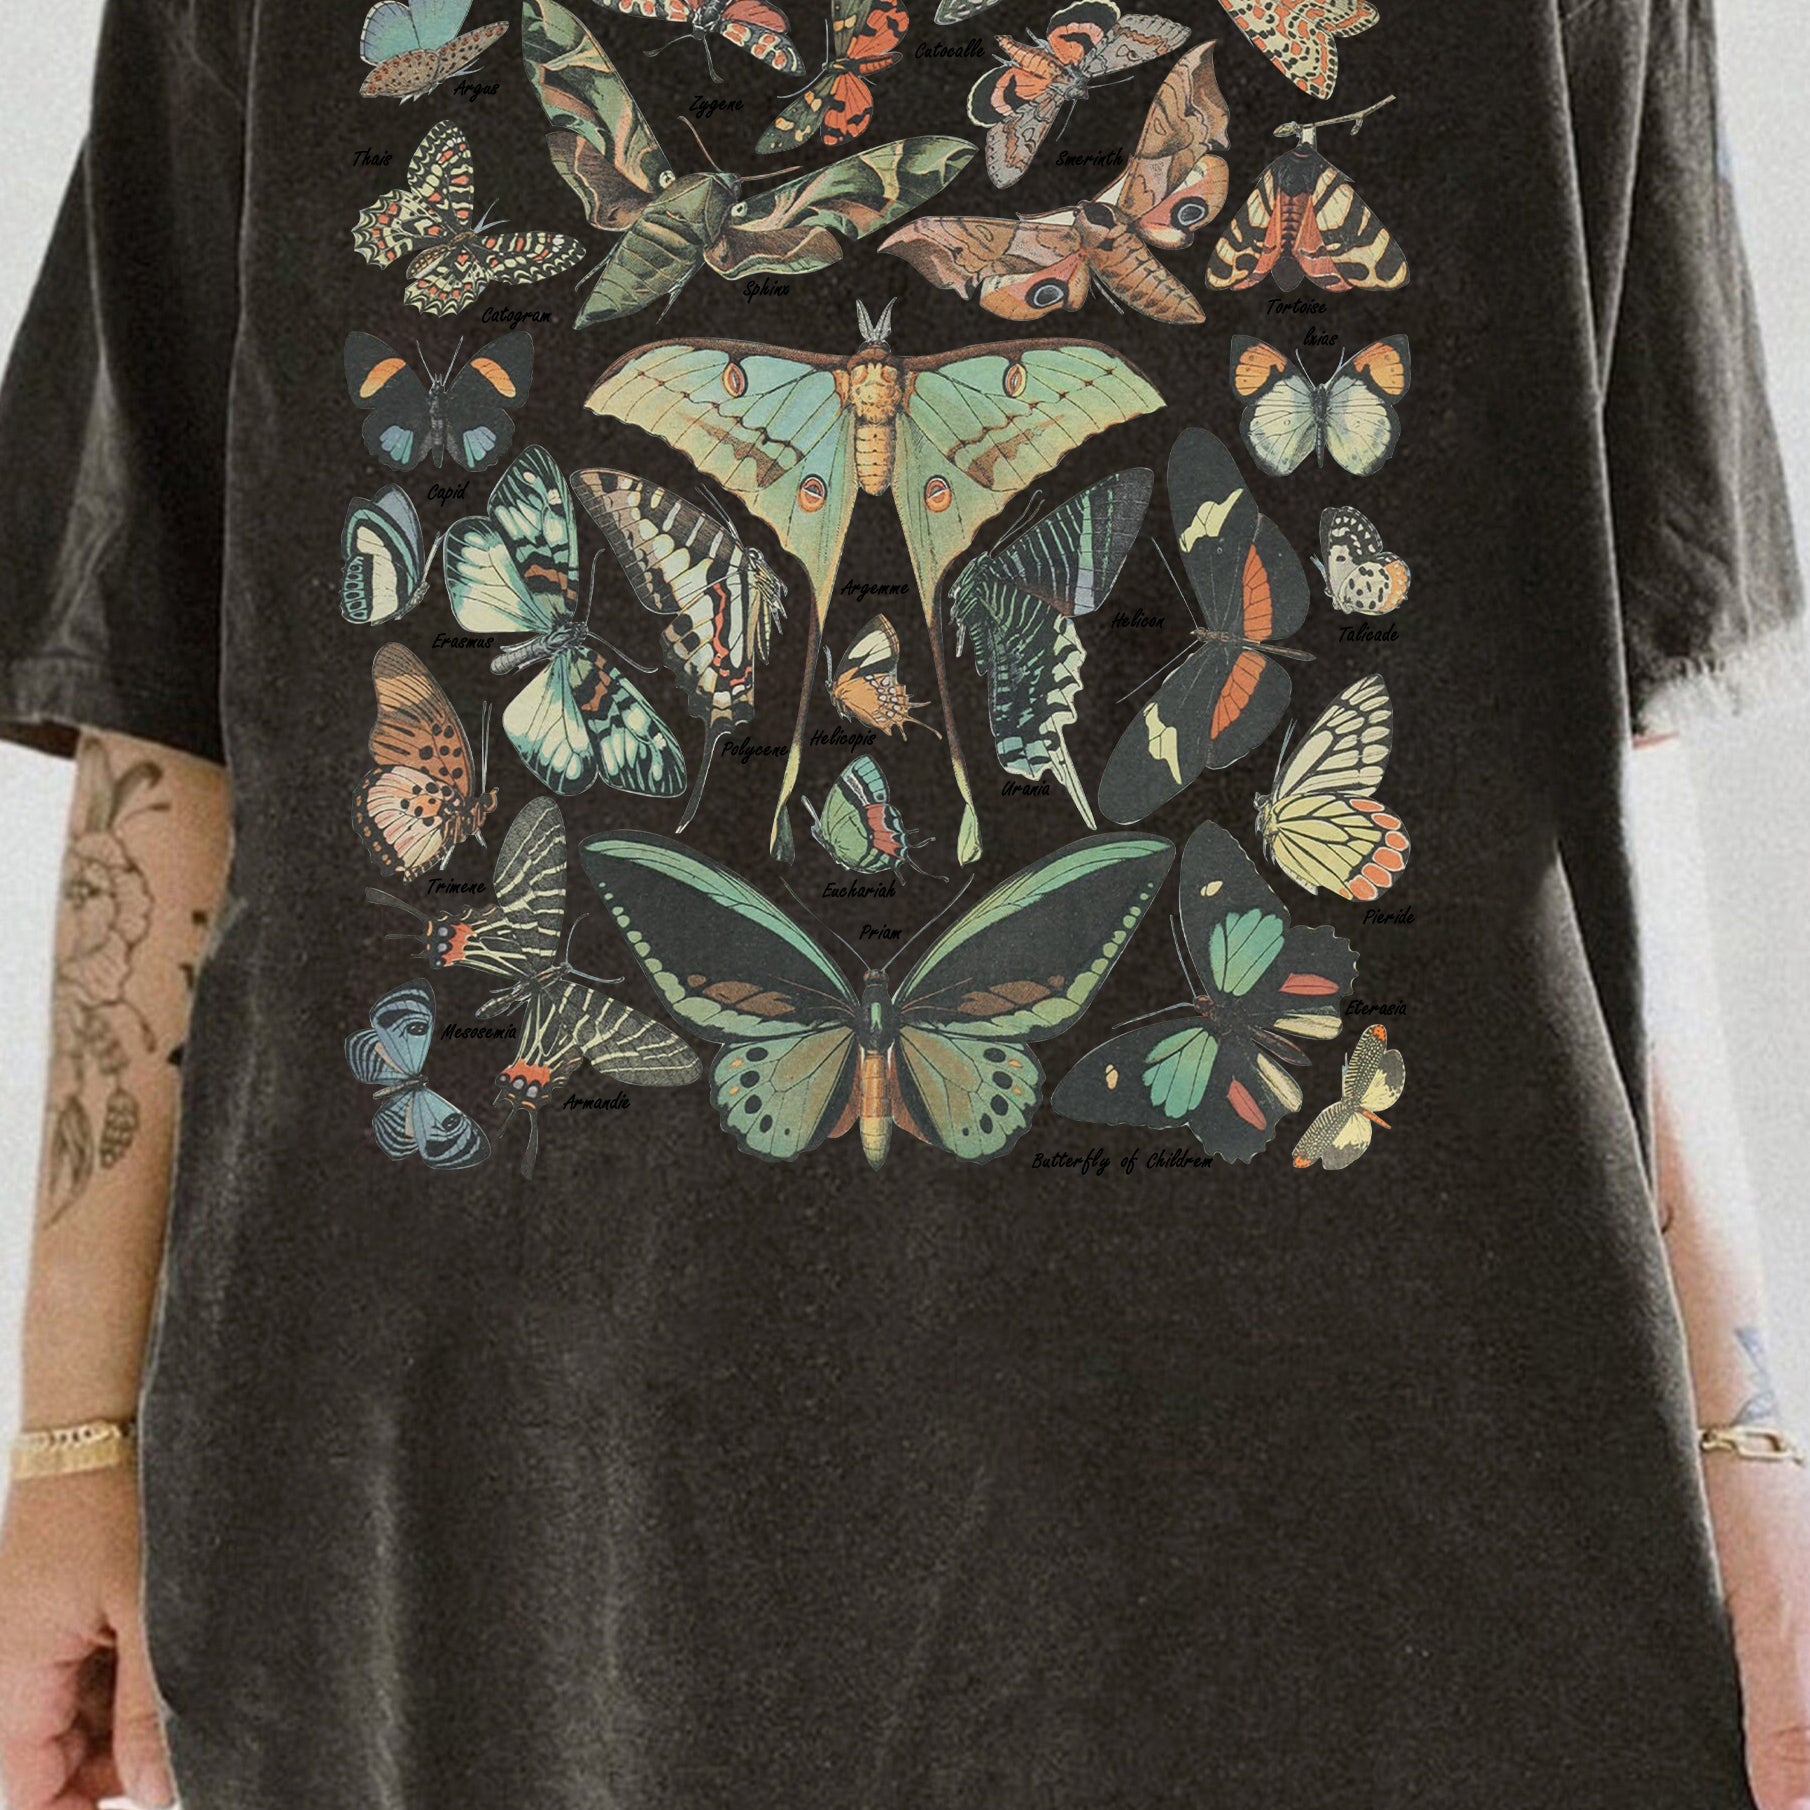 Vintage Butterfly & Moth Cottagecore Aesthetic Tee For Women